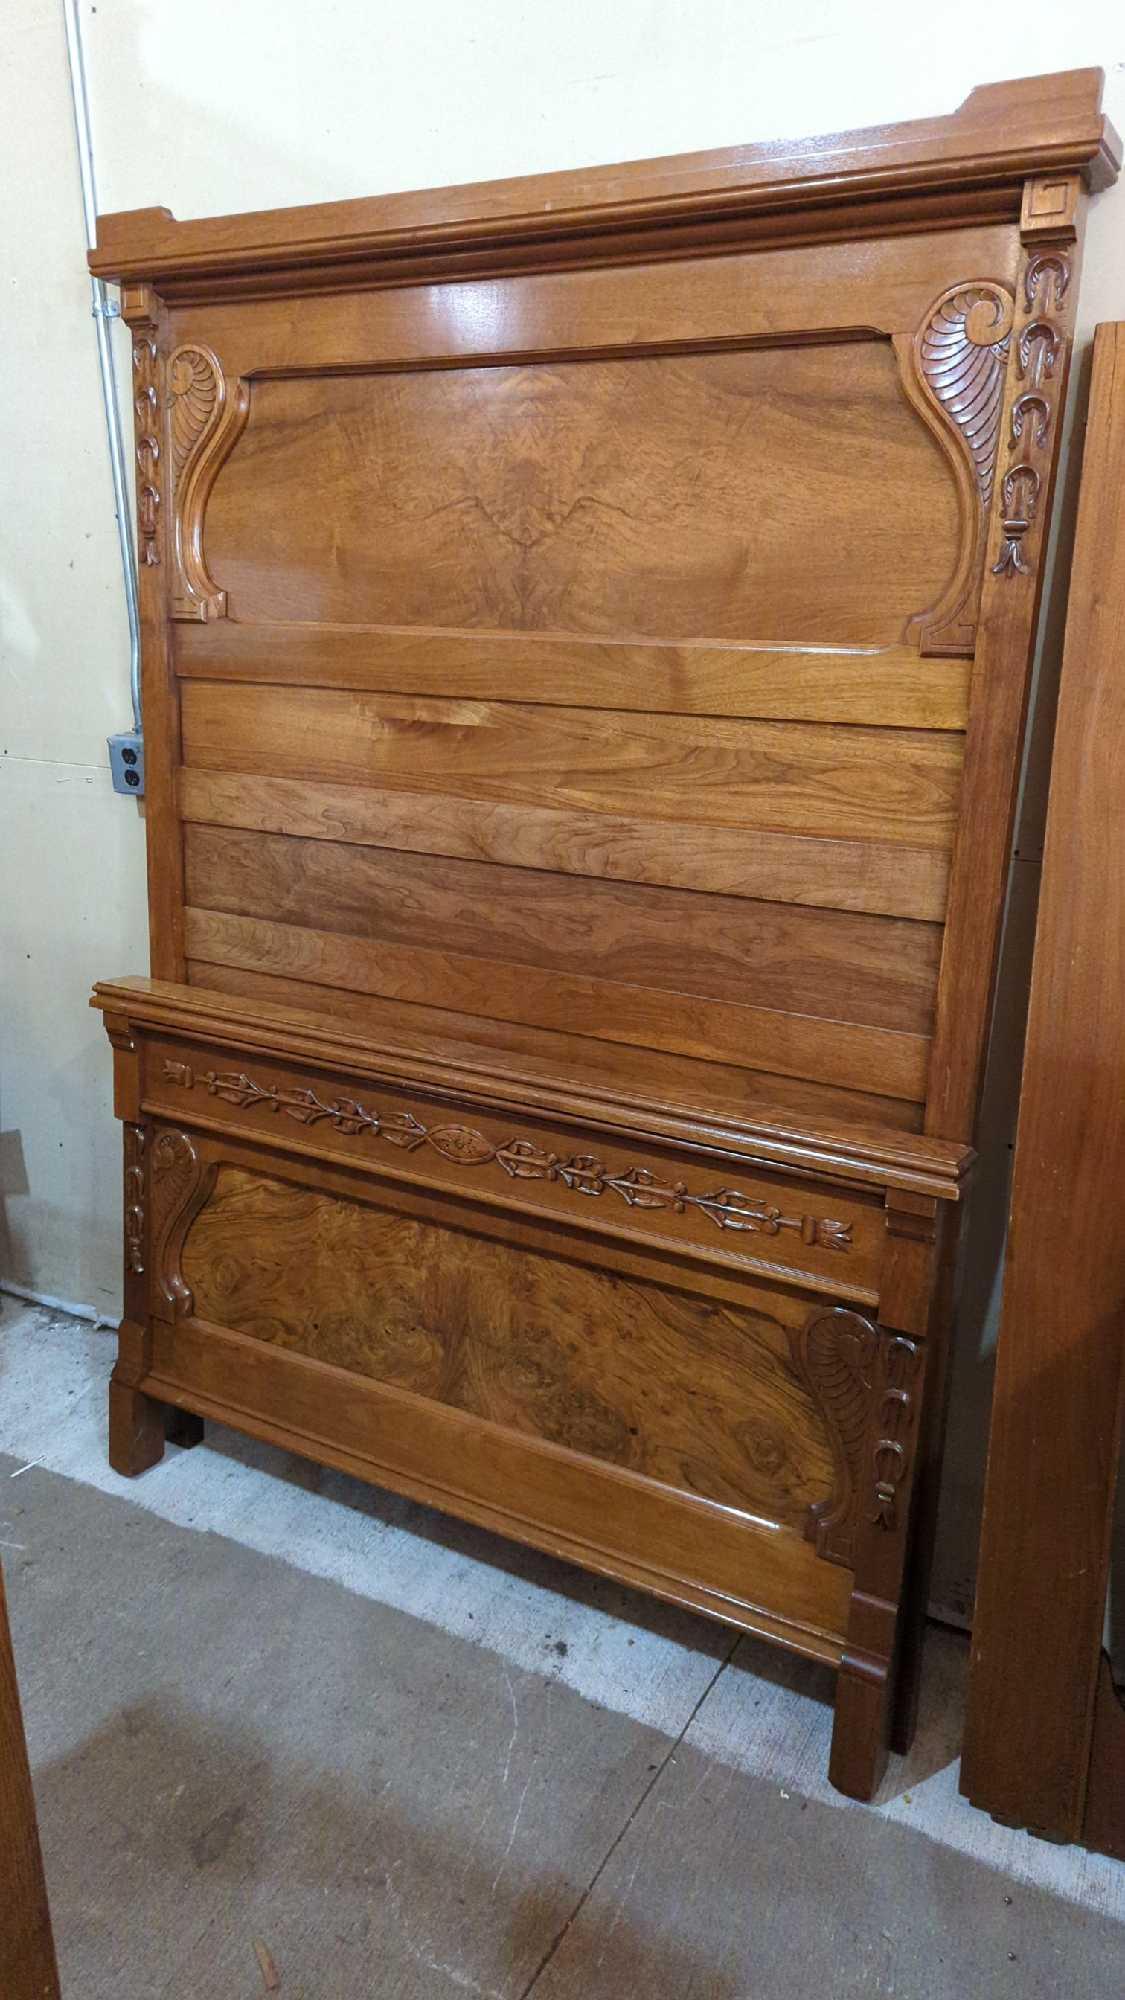 STUNNING ANTIQUE MAHOGANY AND BIRCH BED